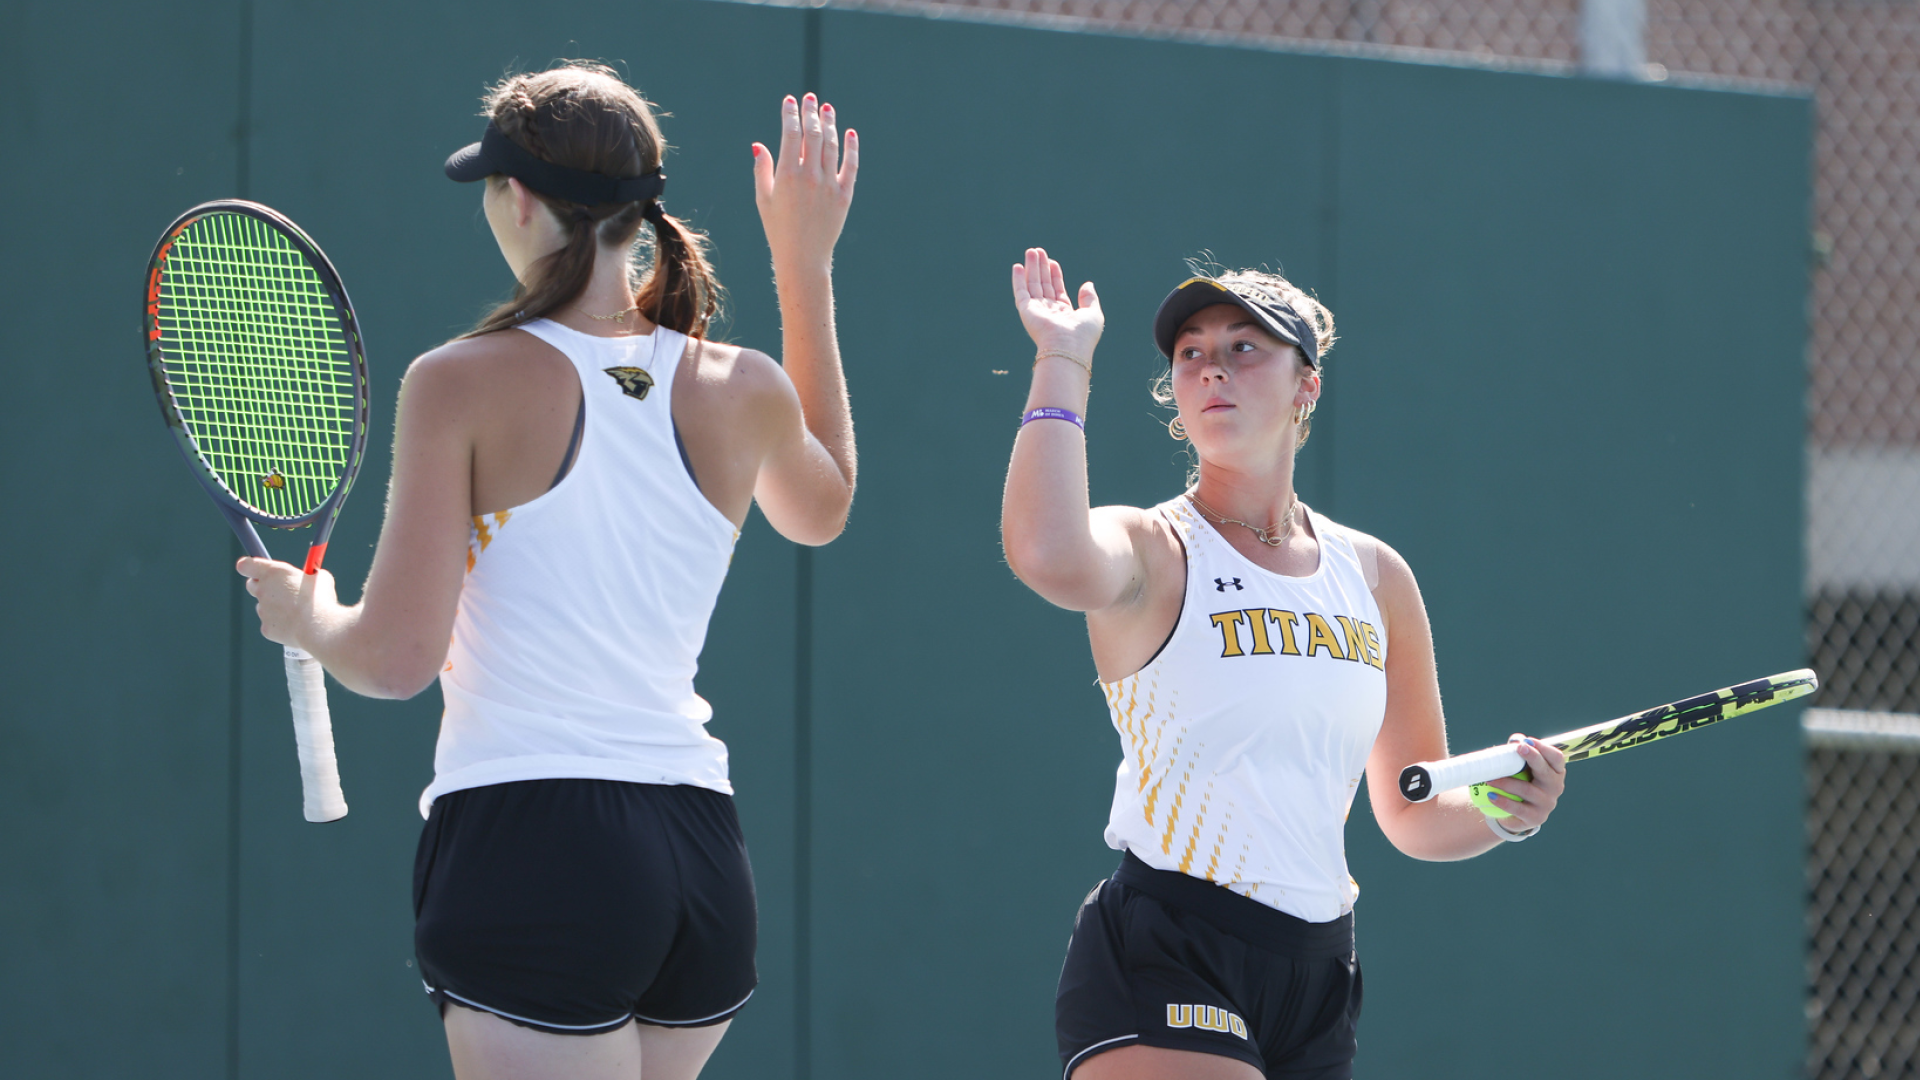 Kayla Gibbs (left) and Jameson Gregory (right) led UW-Oshkosh with a second-place finish in the No. 2 doubles bracket